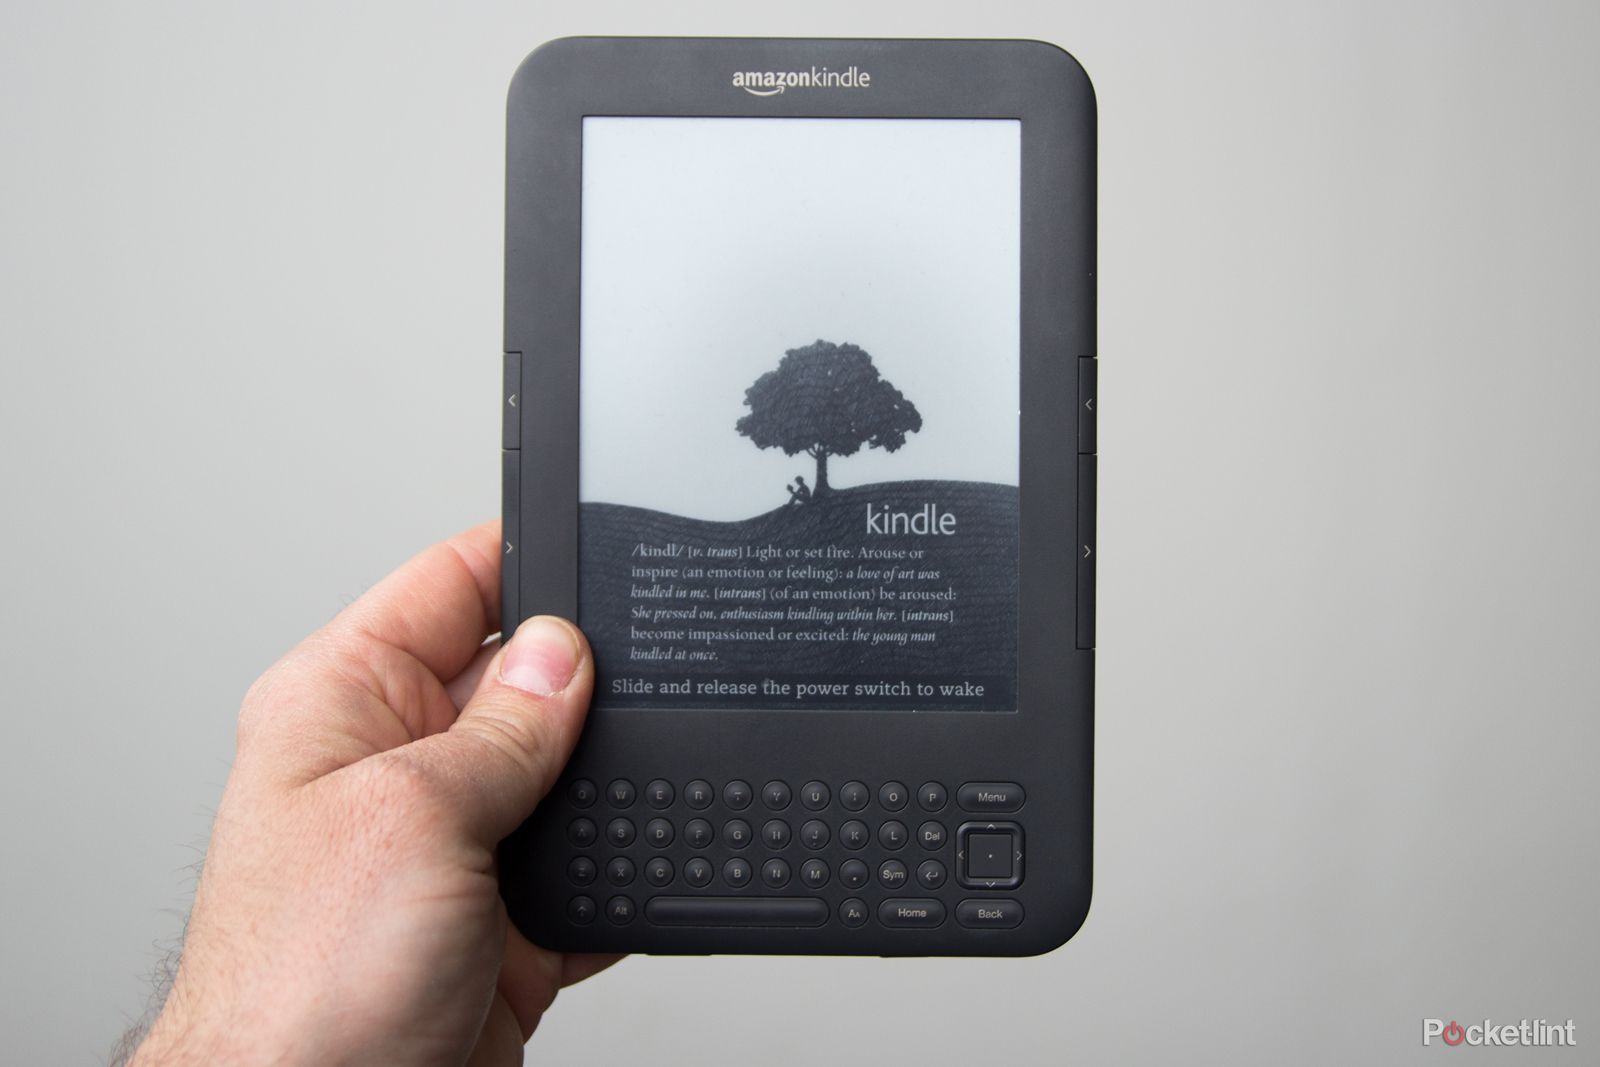 amazon kindle a brief history from the original kindle onwards image 4